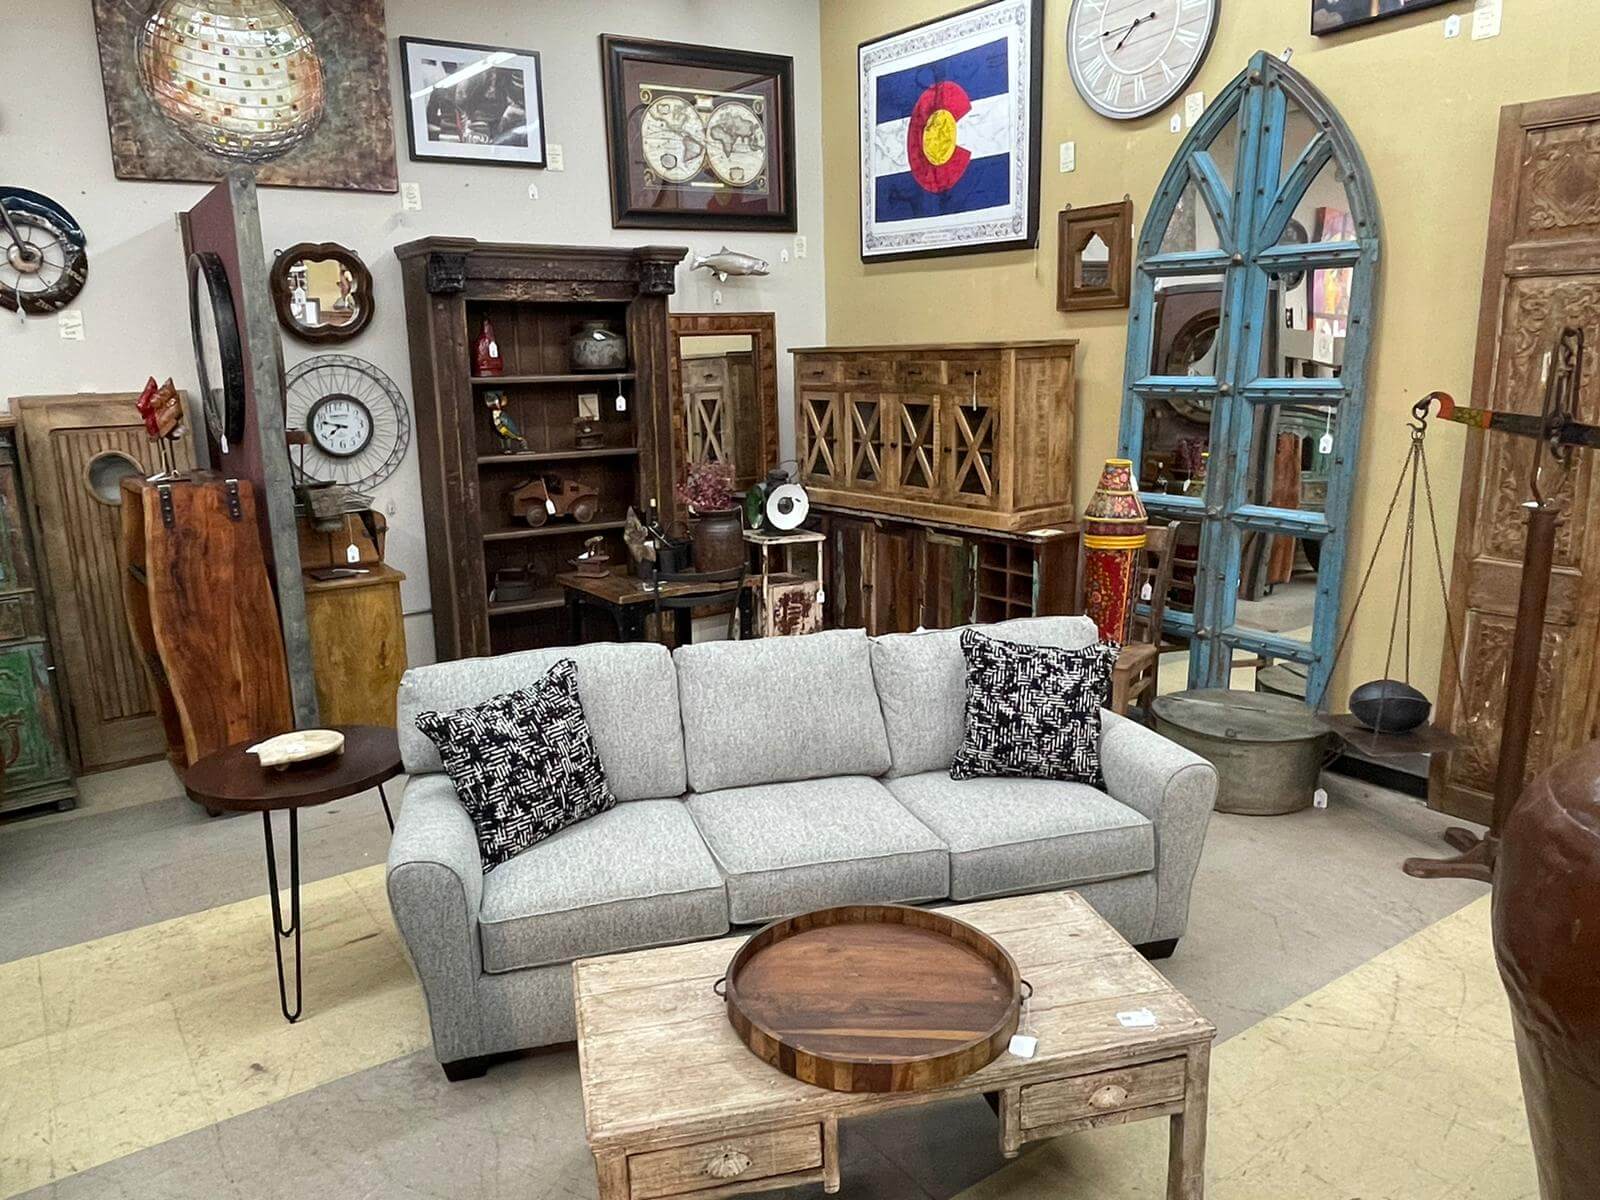 Find living room furniture cabinets and accessories at Highlands Ranch Furniture Store by Rare Finds Warehouse